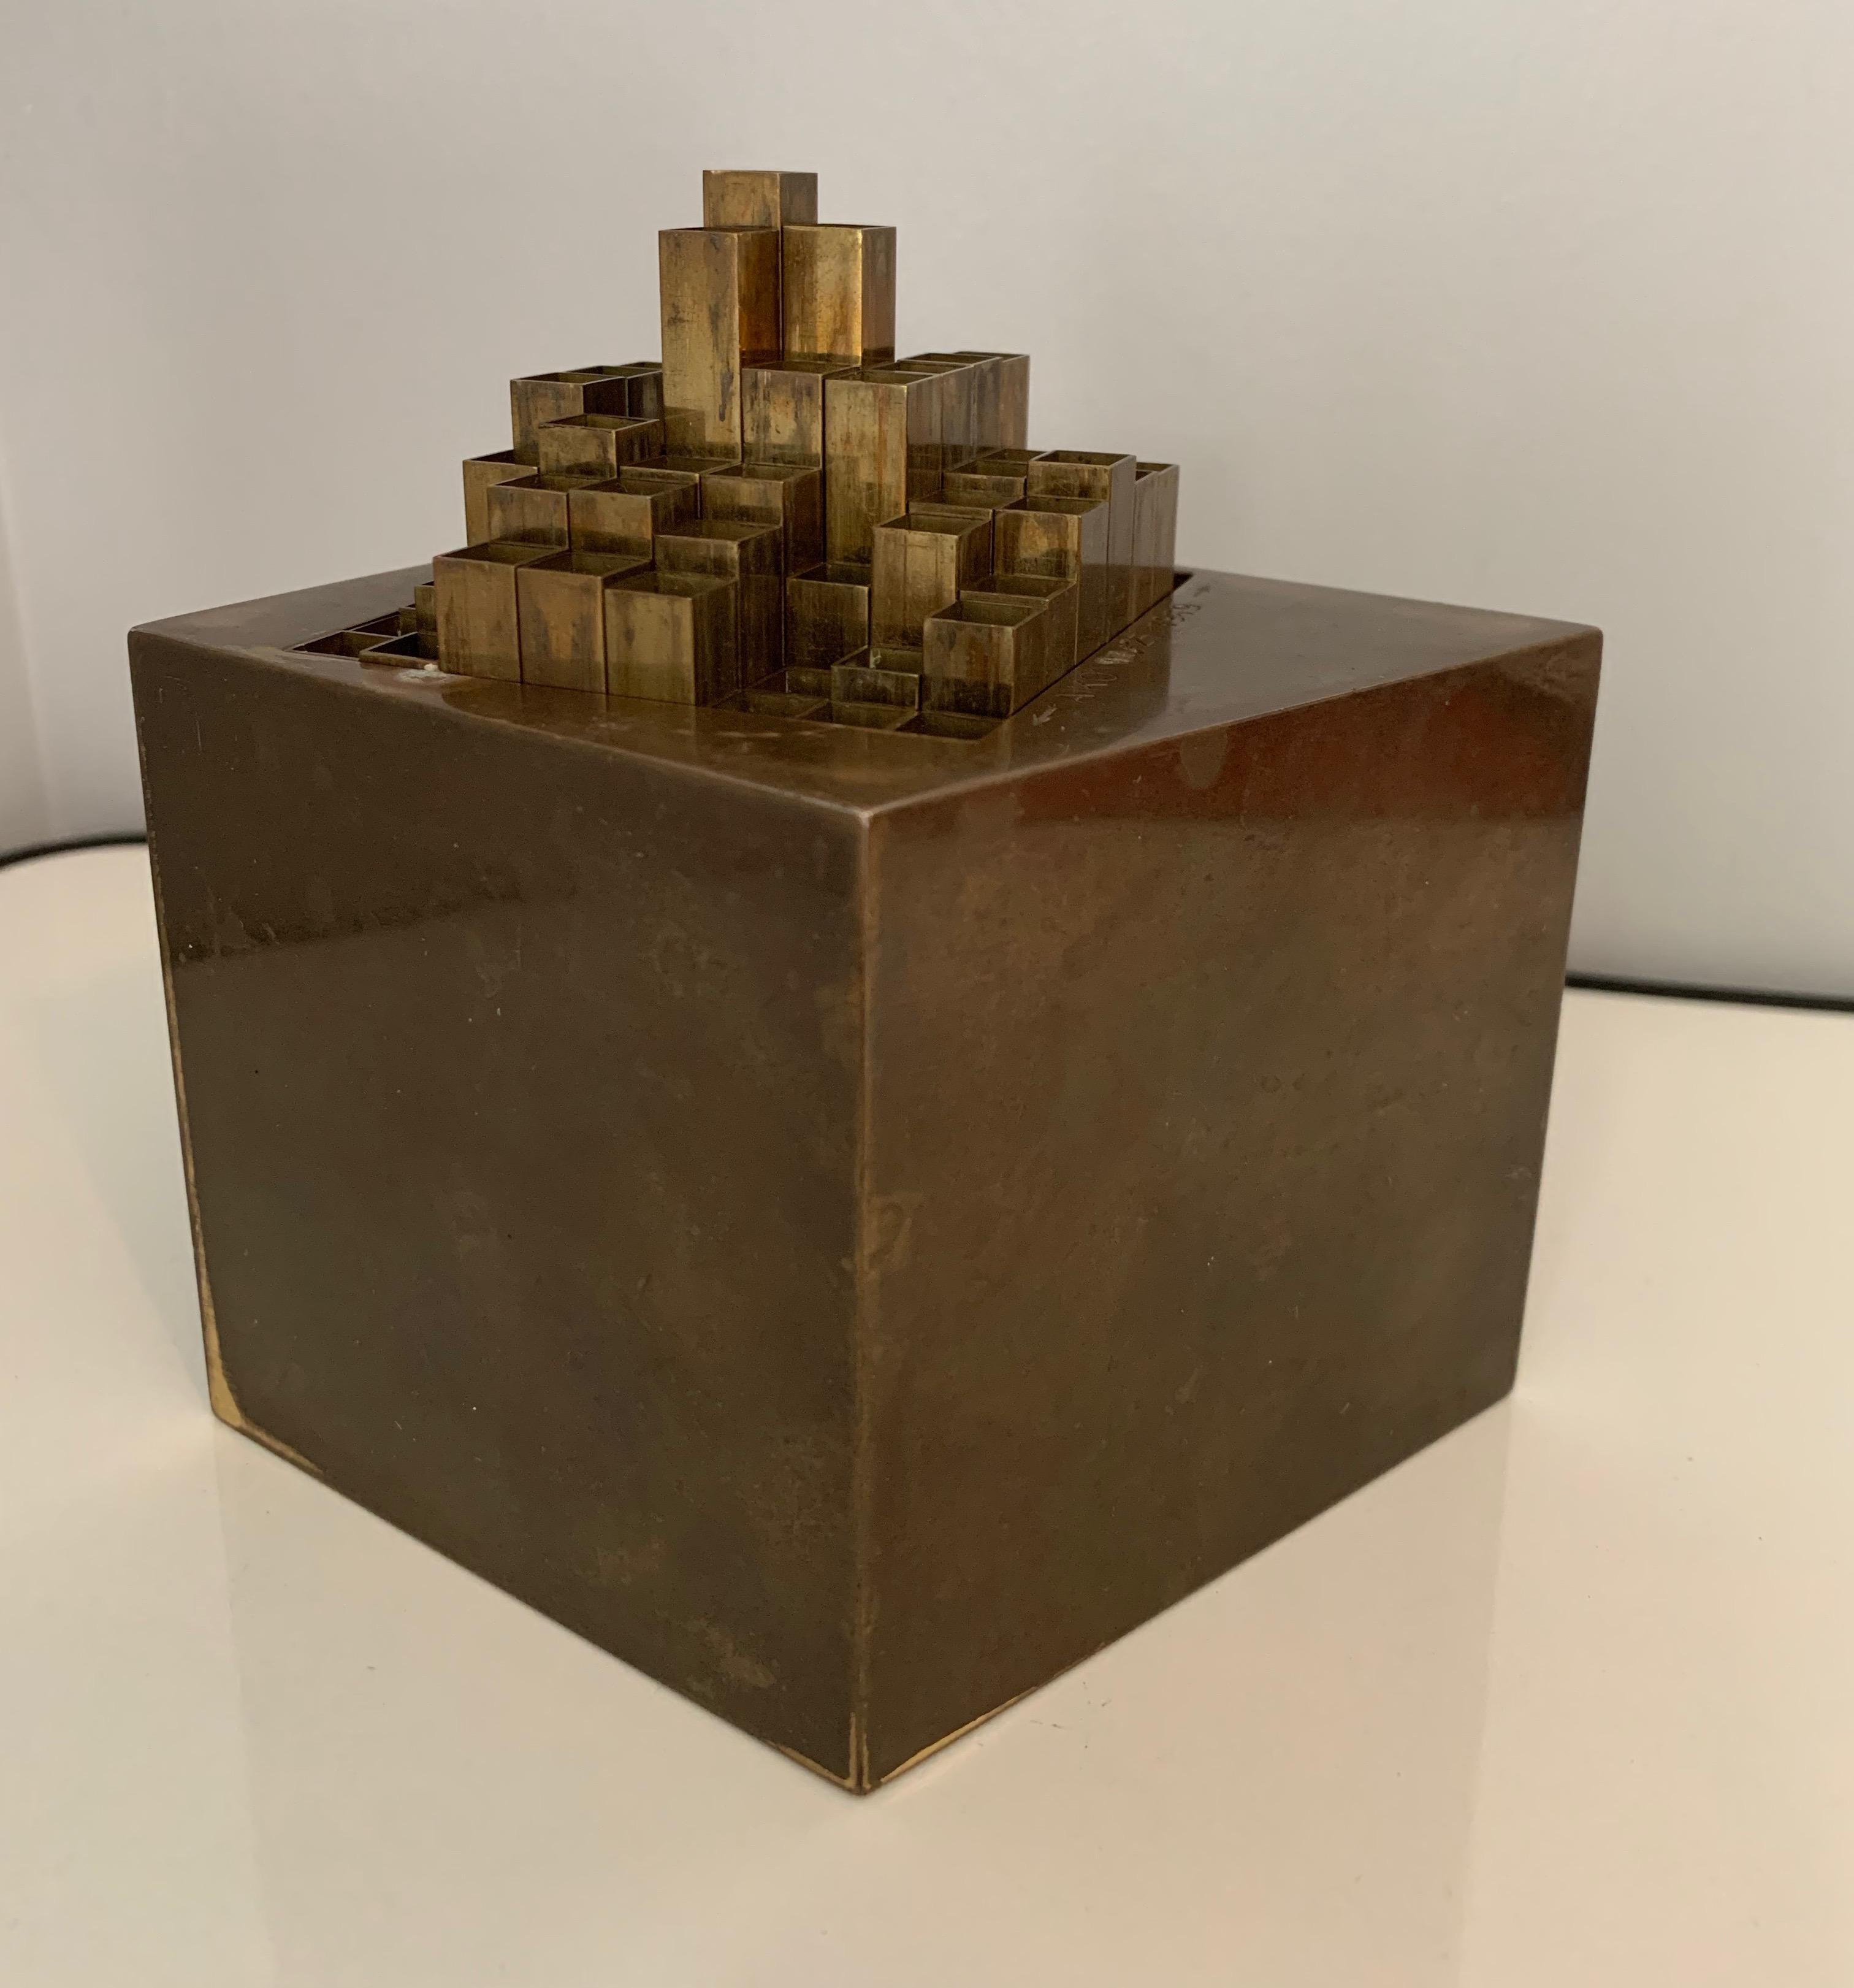 Sculptural and clever architectural desk top accessory with 64 square brass tubes that can be raised in any number of combinations. This piece has a wonderful mellow patina that shows years of wonderment. The piece is marked 